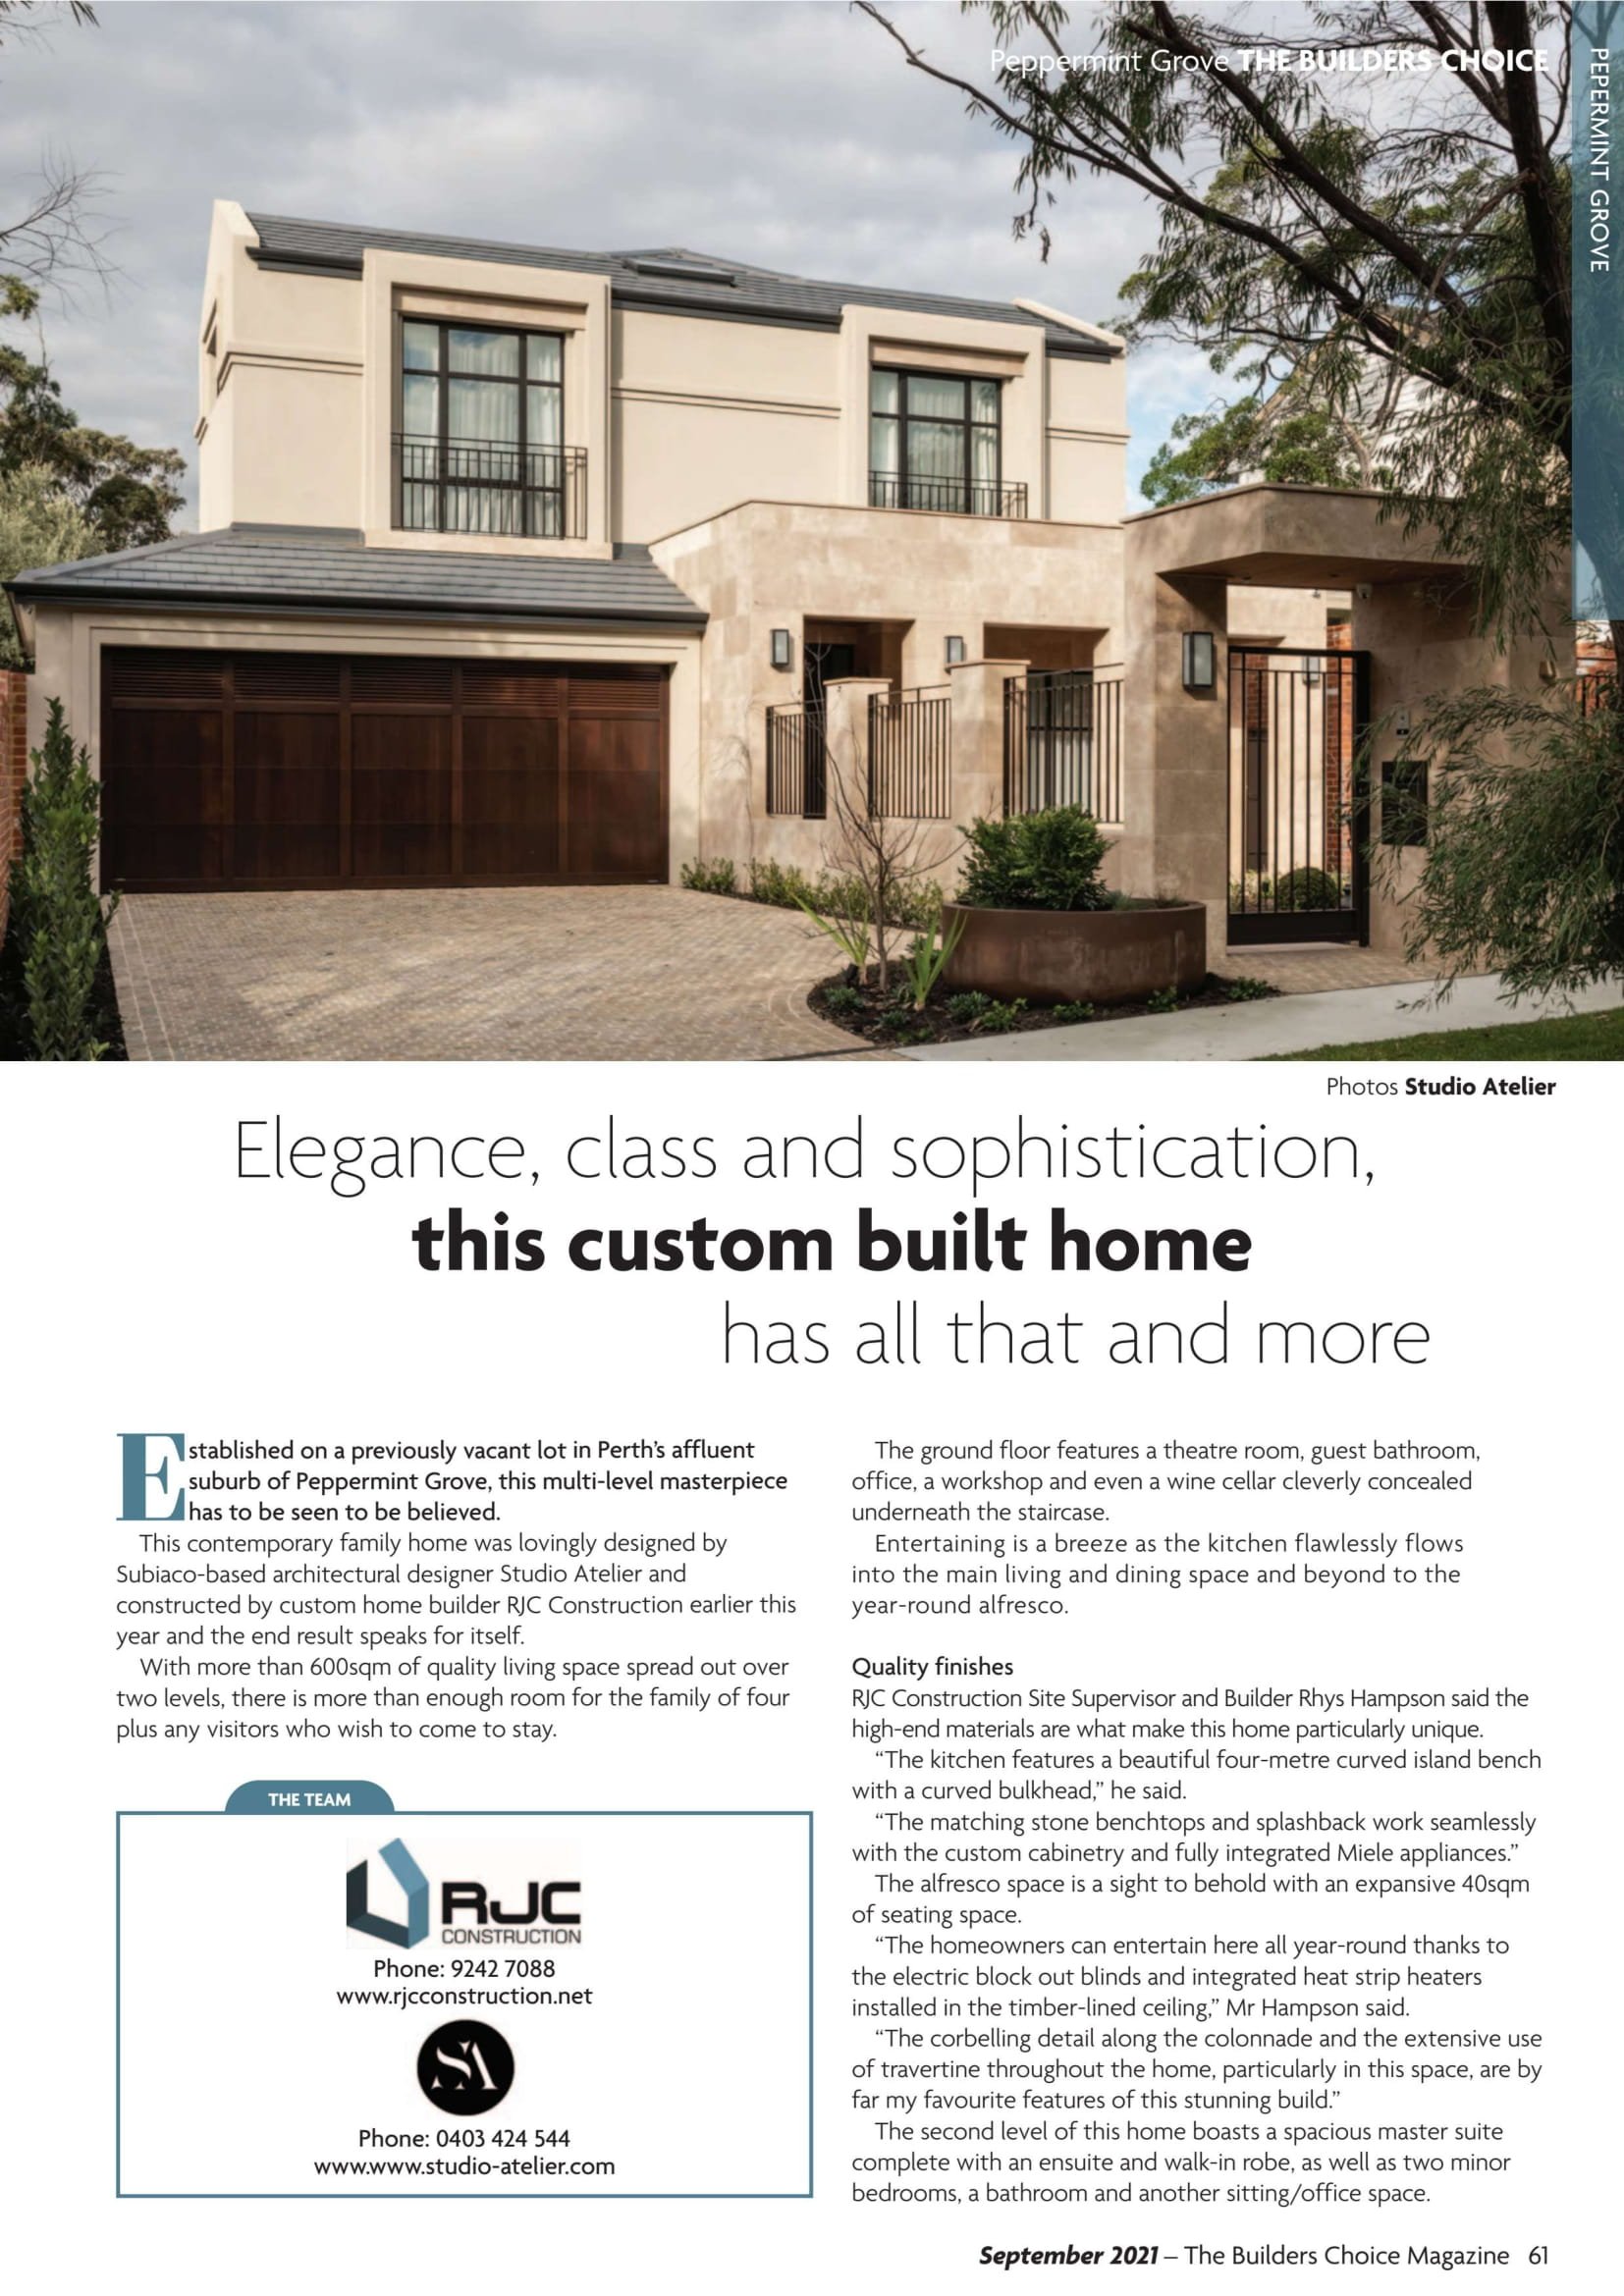 Builders Choice Magazine Sept 2021 select pages-2.jpg